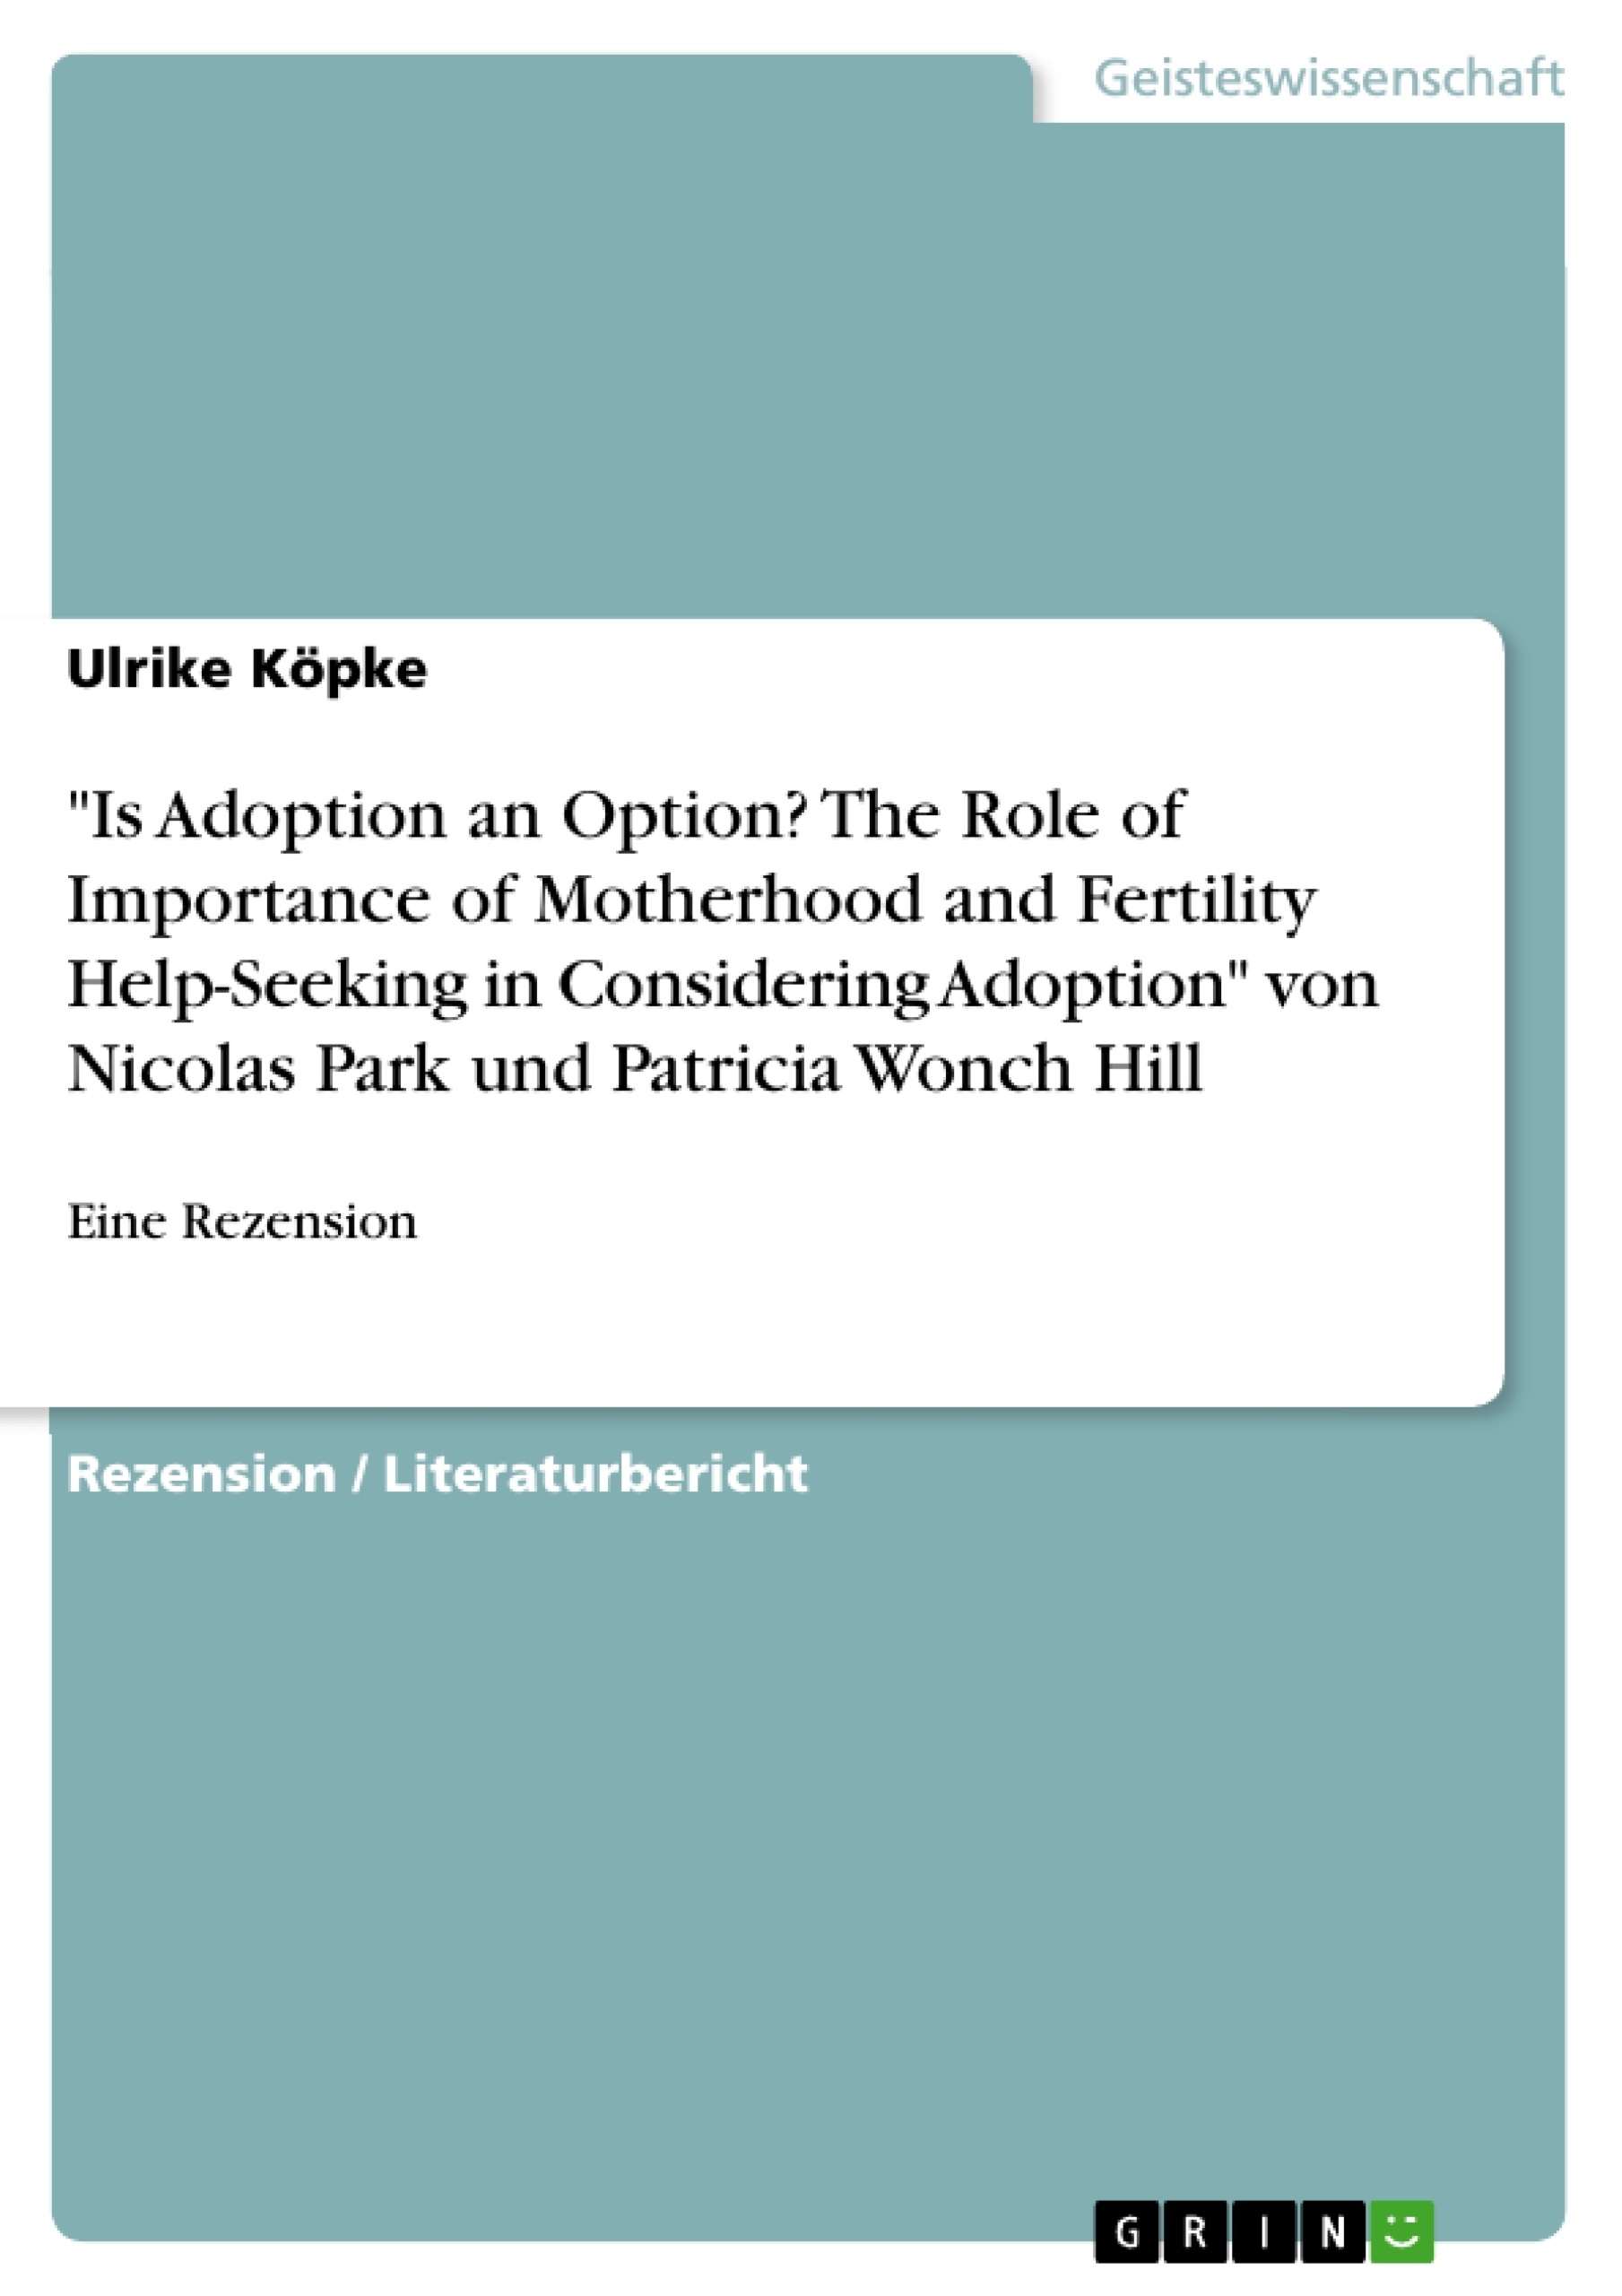 Titel: "Is Adoption an Option? The Role of Importance of Motherhood and Fertility Help-Seeking in Considering Adoption" von Nicolas Park und Patricia Wonch Hill